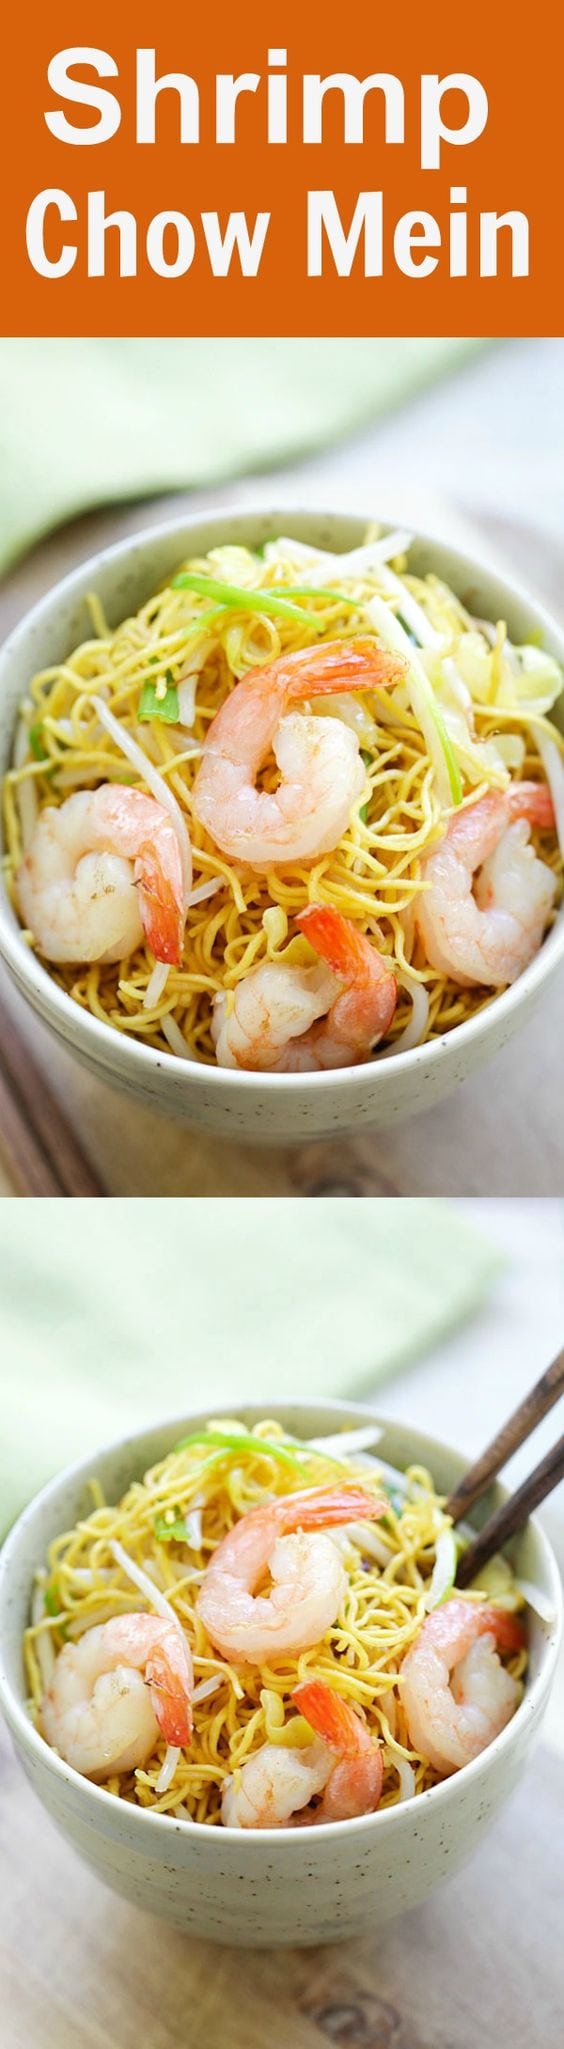 Shrimp Chow Mein - BEST shrimp chow mein recipe ever! This homemade chow mein is loaded with shrimp and so much better than takeouts | rasamalaysia.com